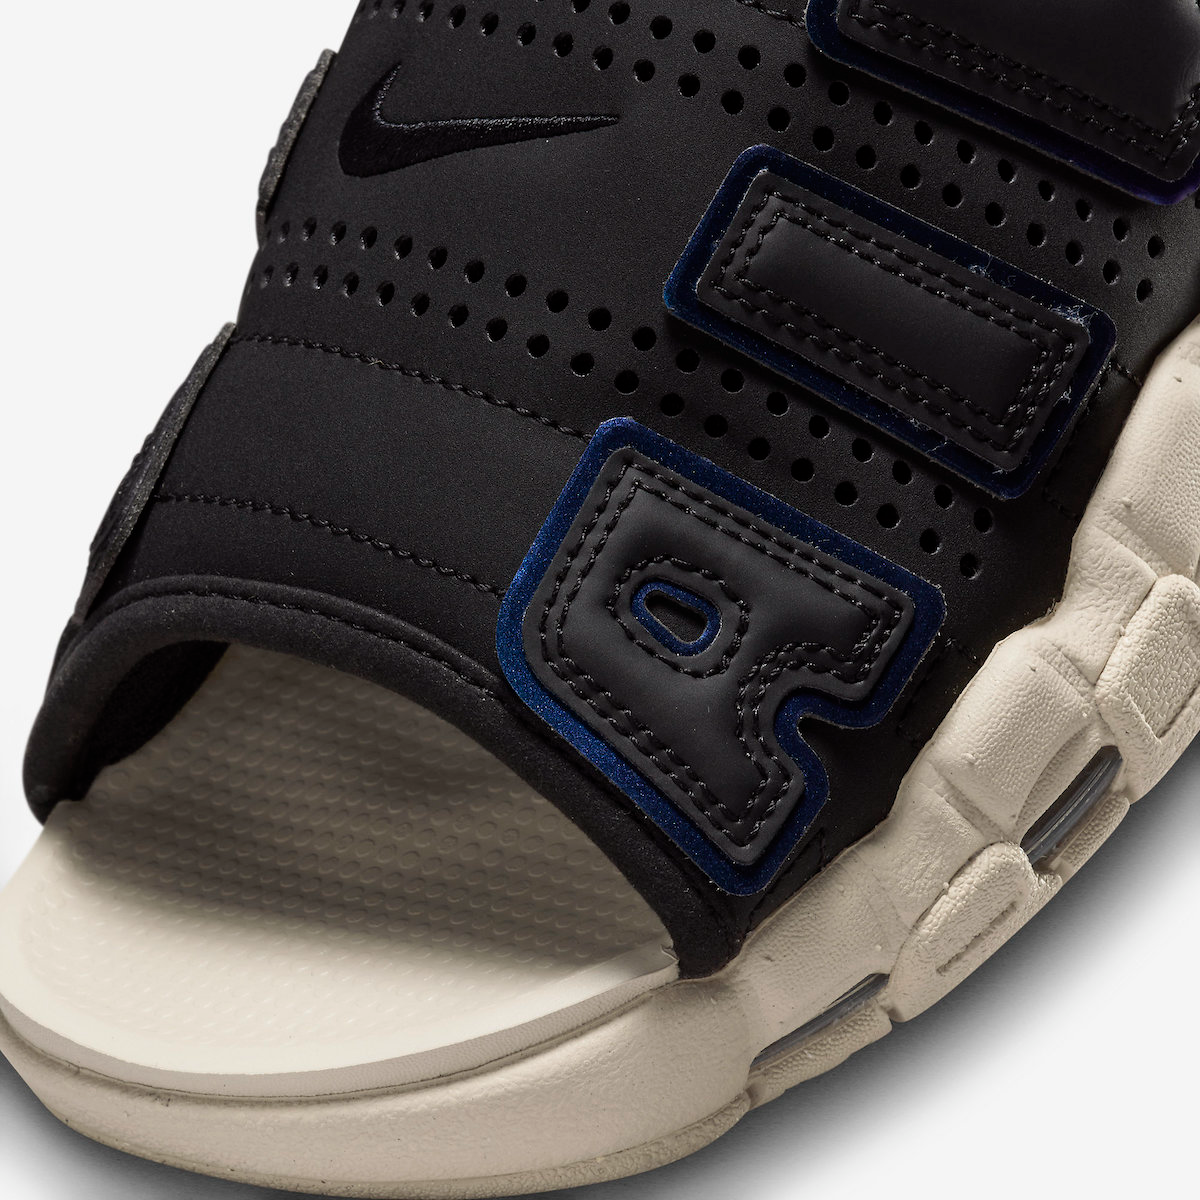 Official Images: New Nike Air More Uptempo Slides On the Way